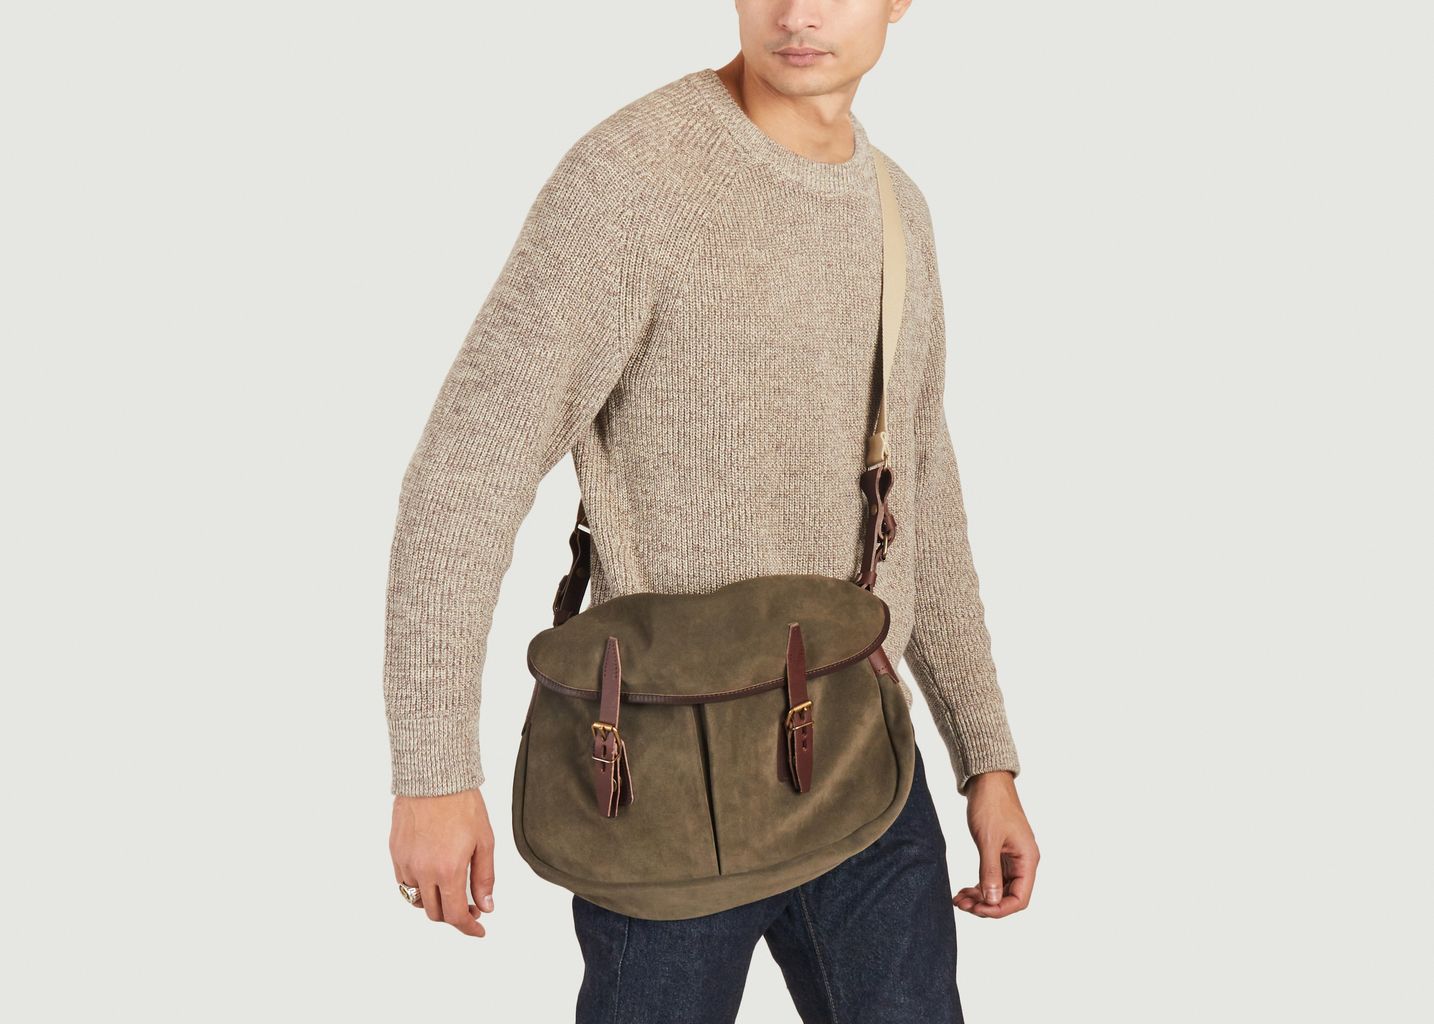 Fisherman's Musette M / Suede - Musk